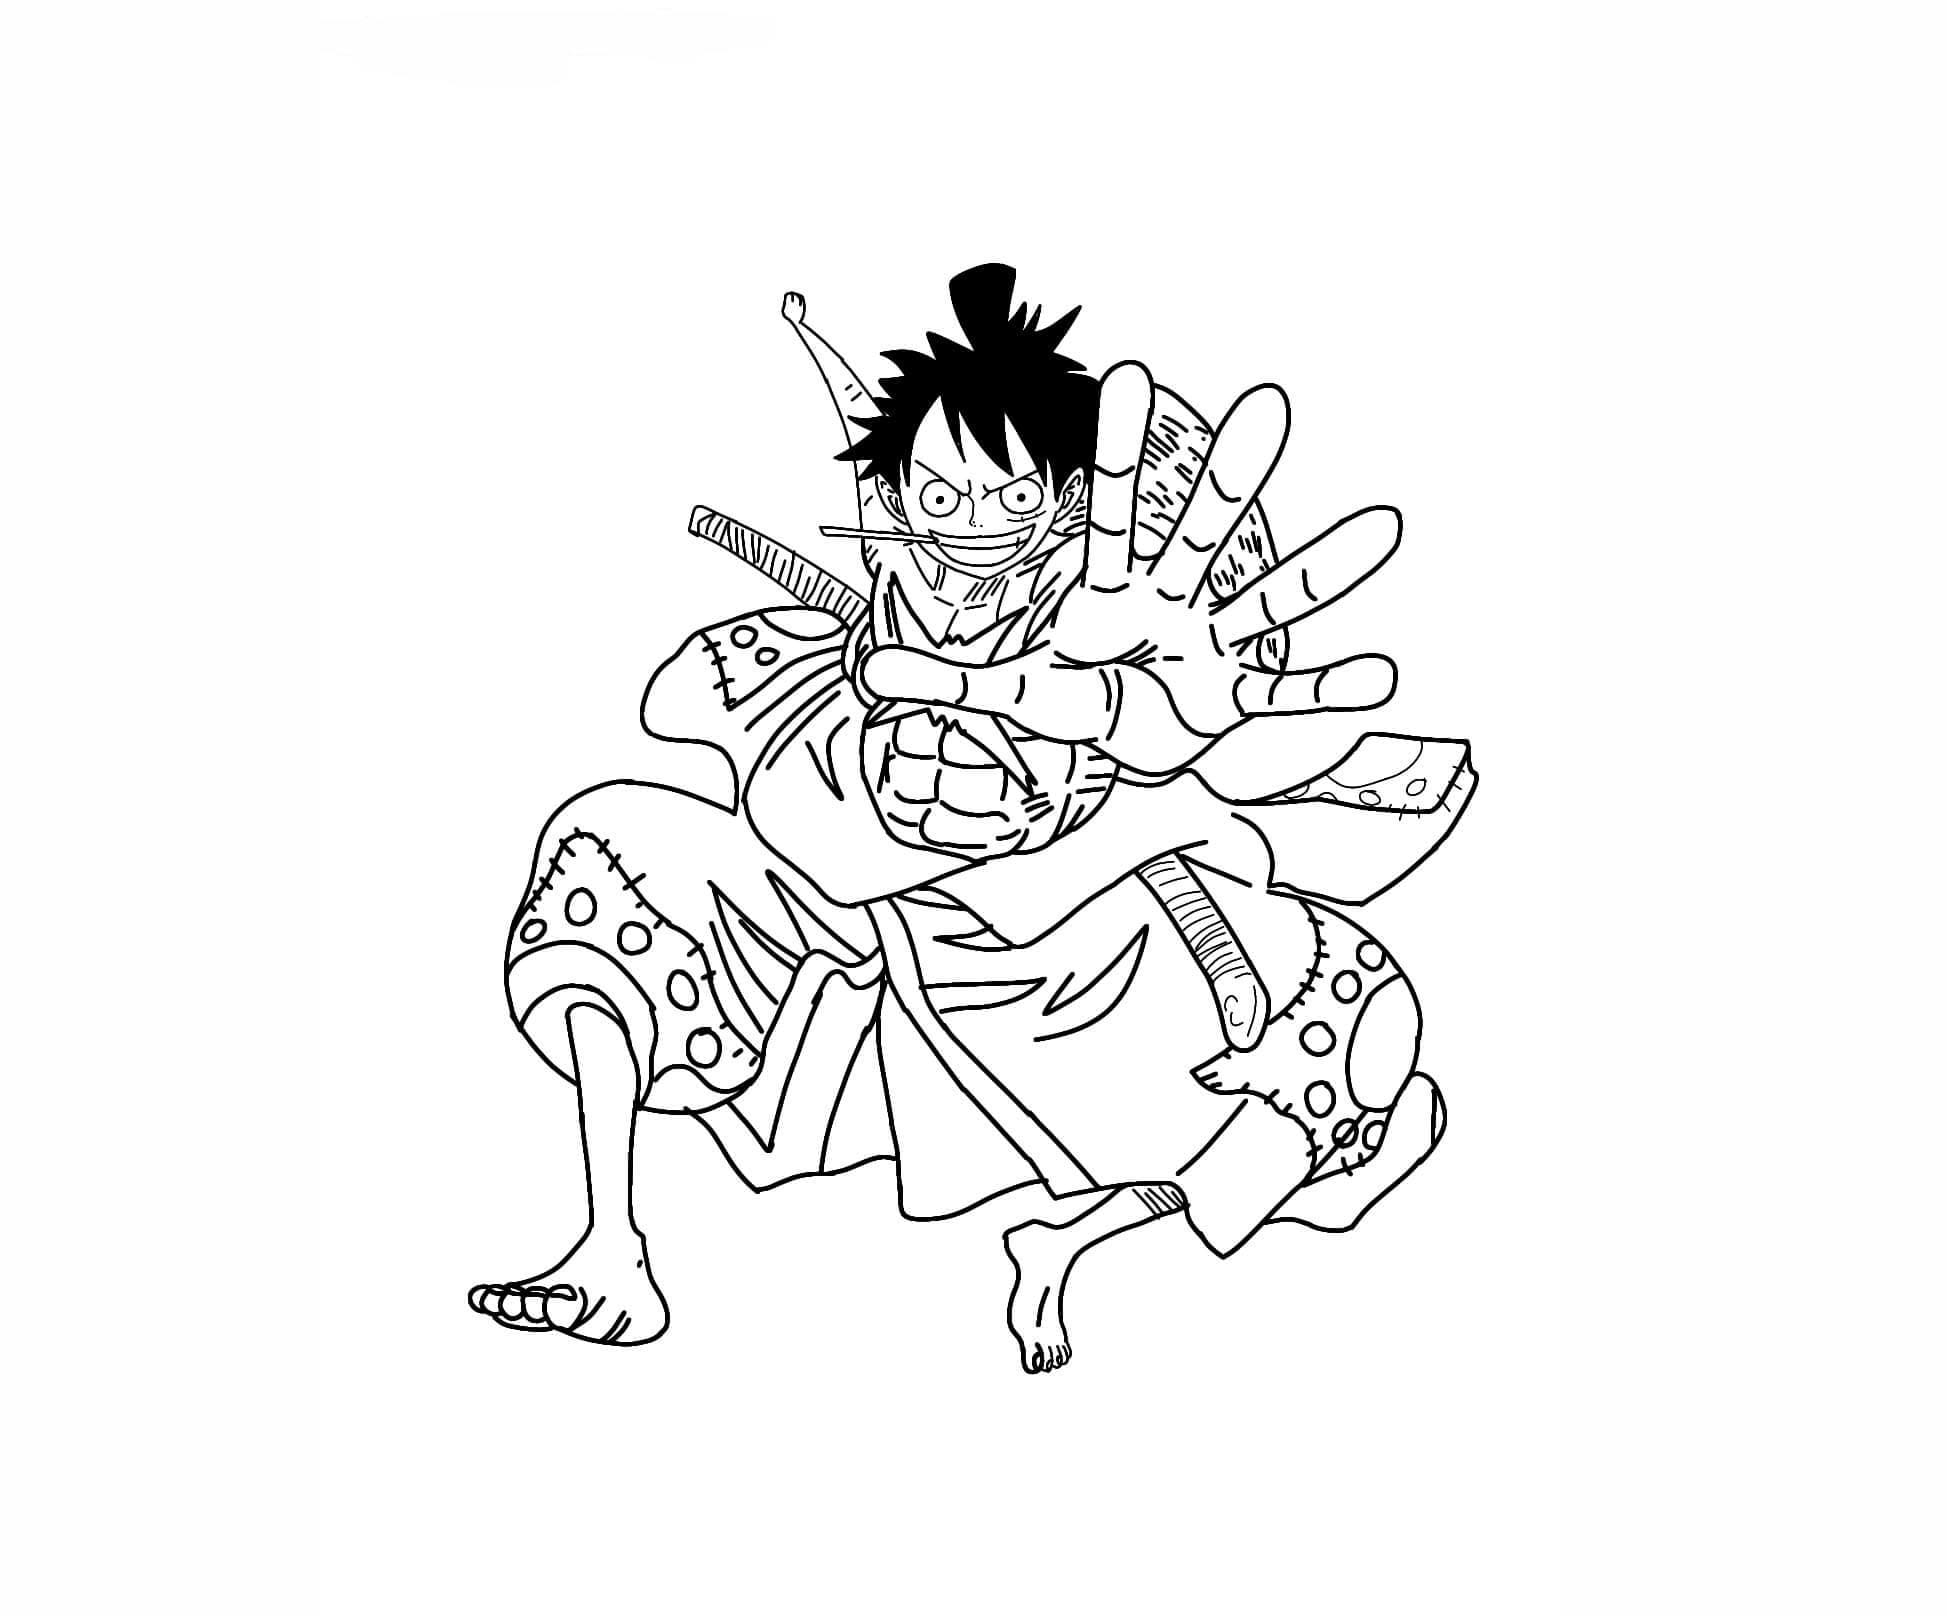 Monkey D. Luffy de One Piece coloring page